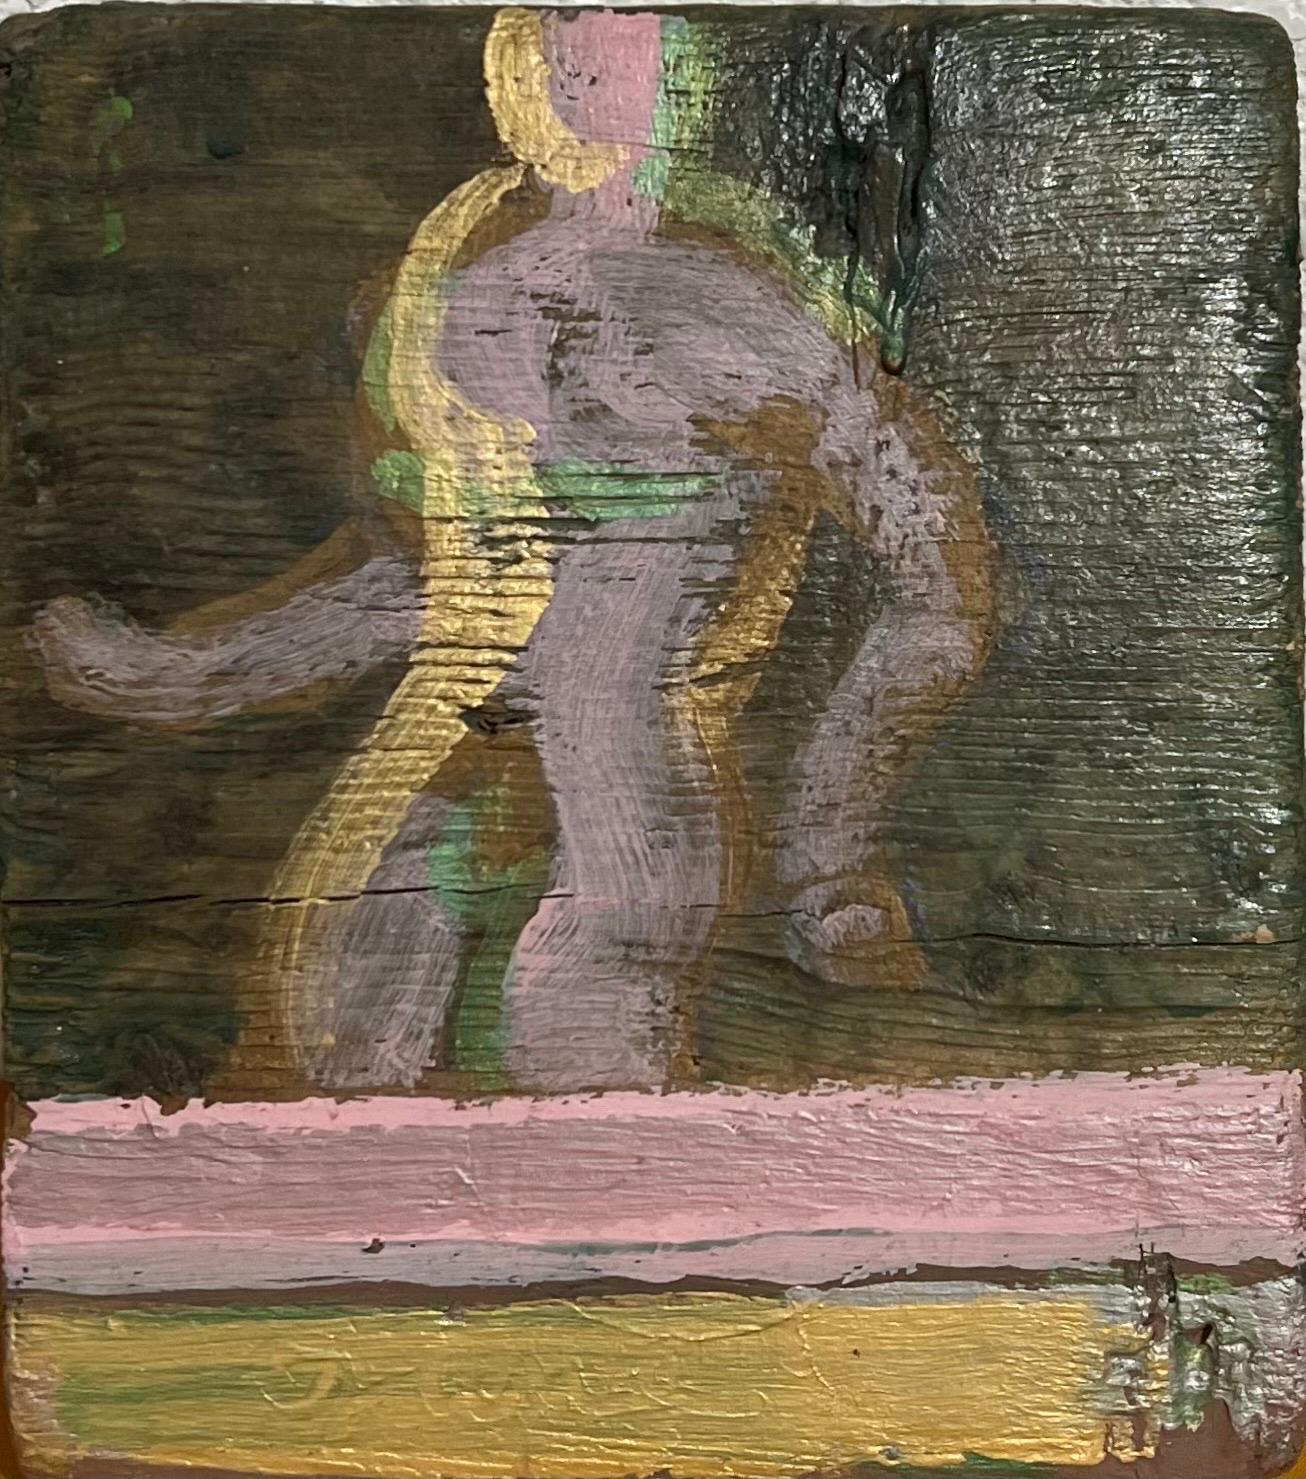 Edward Avedisian ( 1936-2007 ) 
8 X 9
Oil paint on wood plank panel with gold and purple figure
This is not signed on front. It bears his name verso.
Provenance: Hudson, N.Y. estate of noted Art Collector Albert Burnette Roberts (1932-2021)

Edward